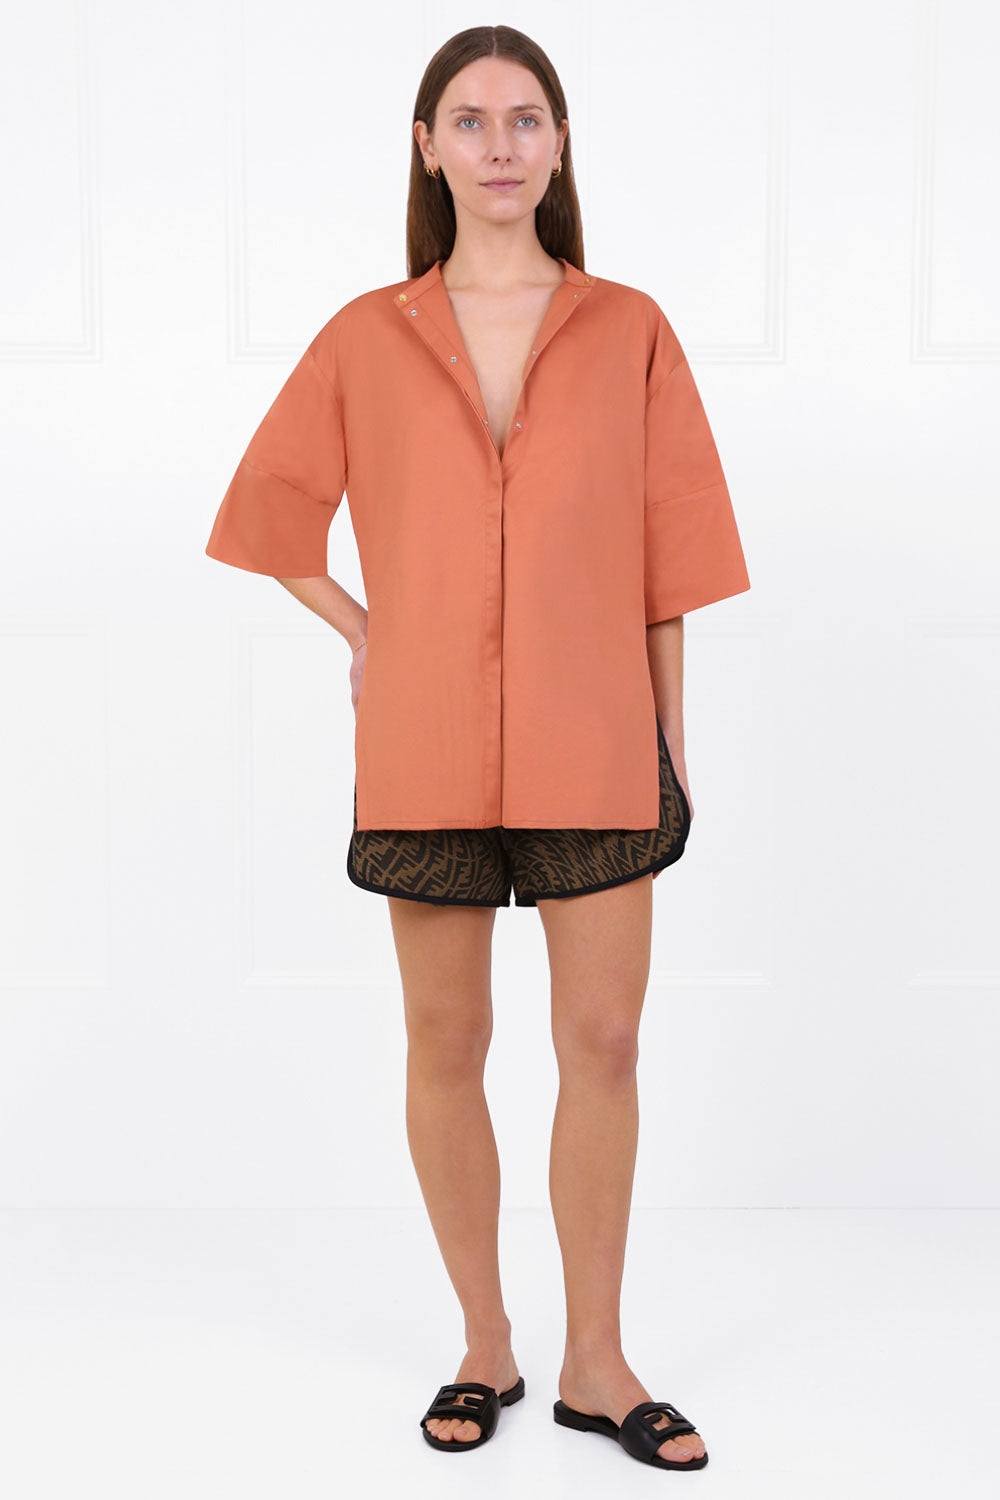 MOTHER OF PEARL SHIRTS JADE OVERSIZED SHIRT S/S SEPIA BROWN